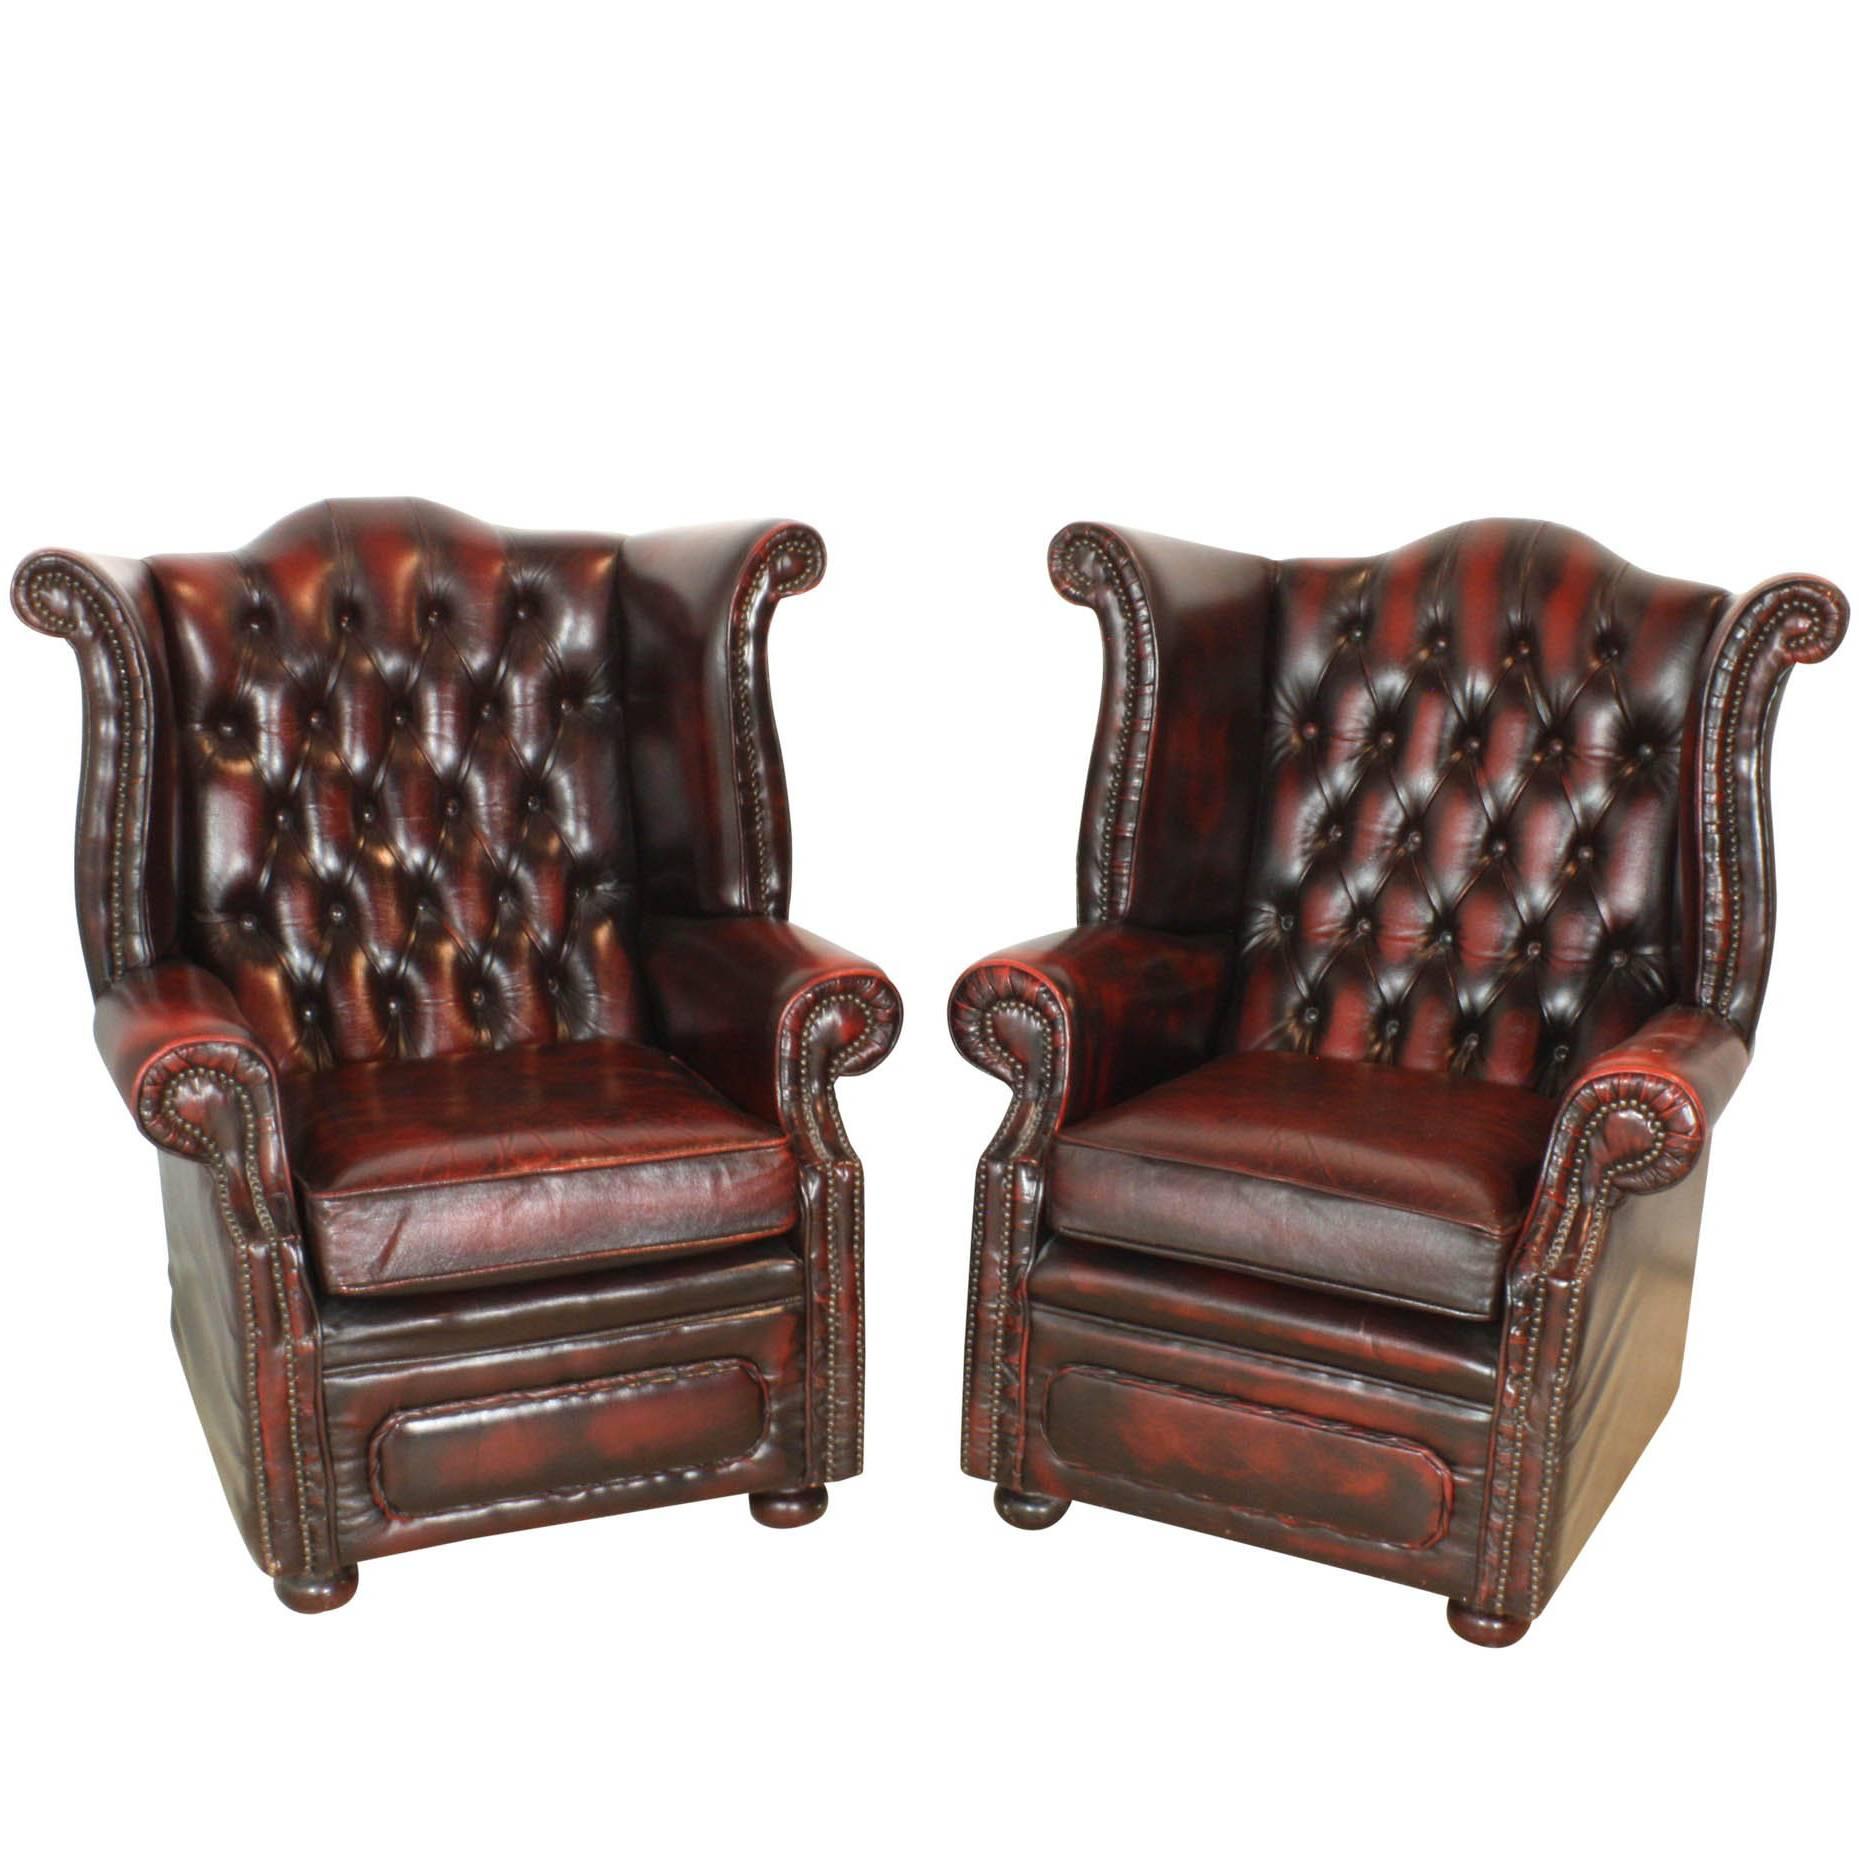 Set of Two English Chesterfield Wingback Oxblood Leather Chairs, circa 1930